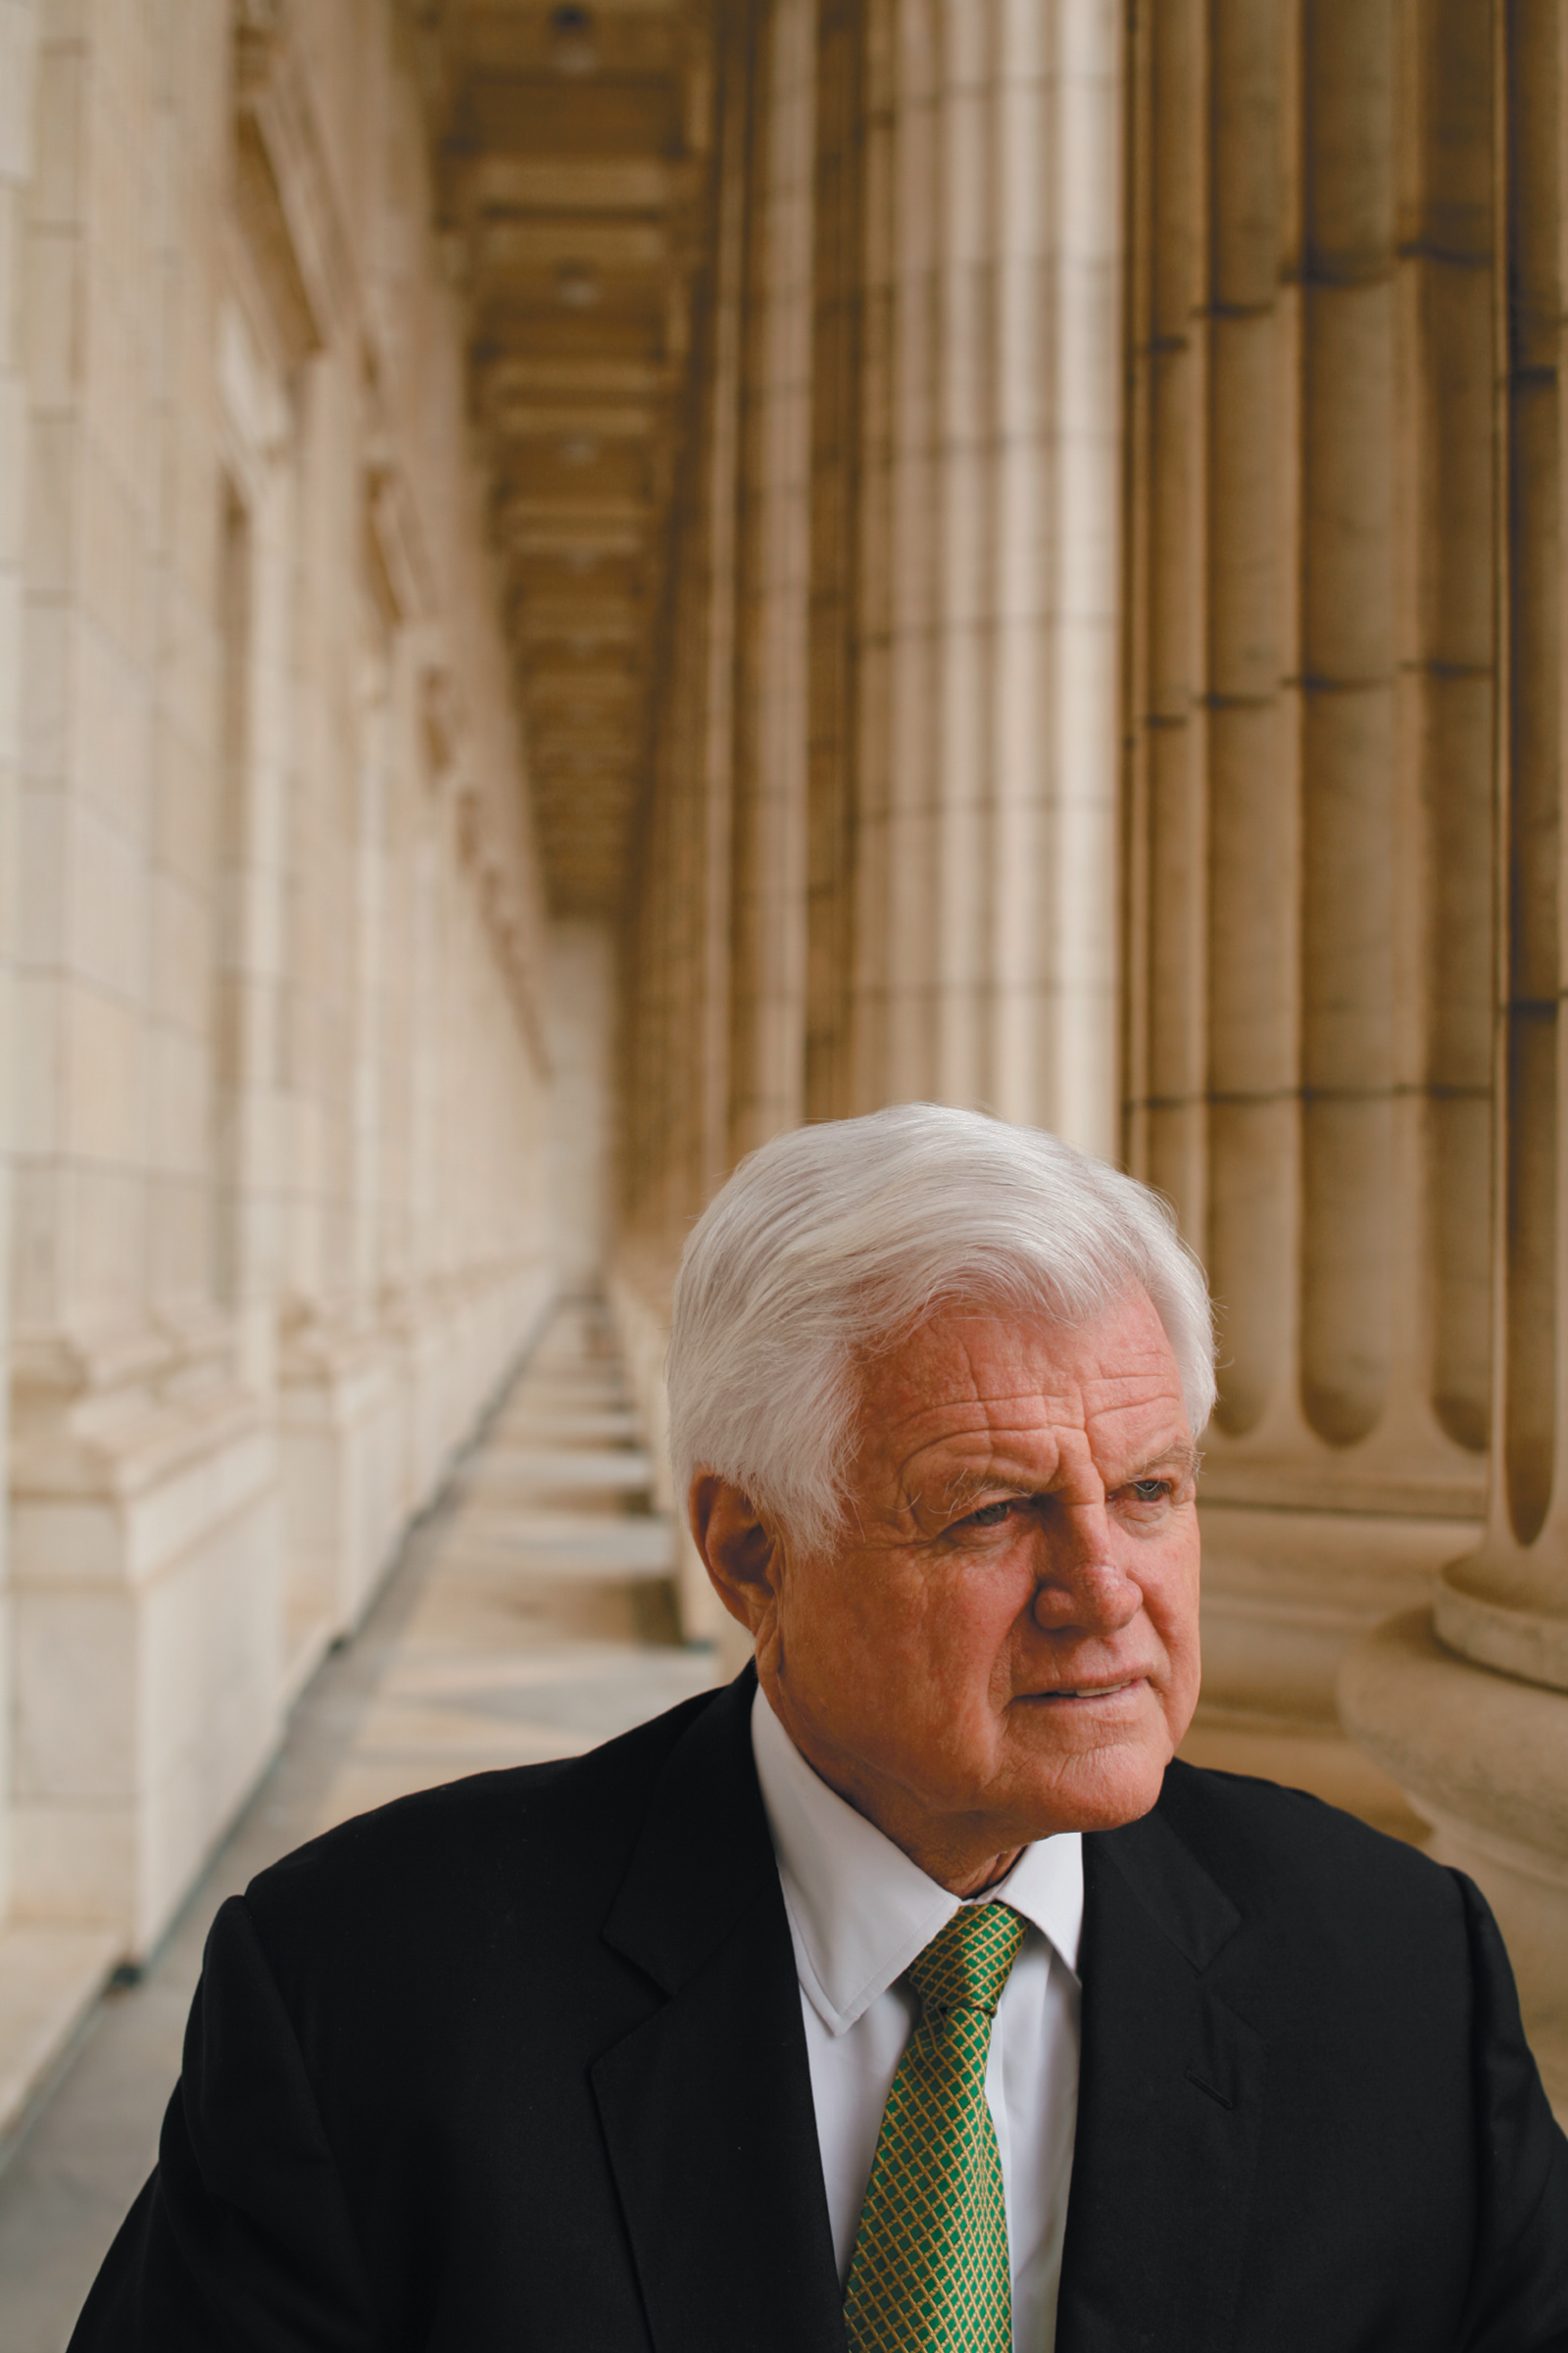 Ted Kennedy outside his office at the Russell Senate Office Building, Washington, D.C., March 2006